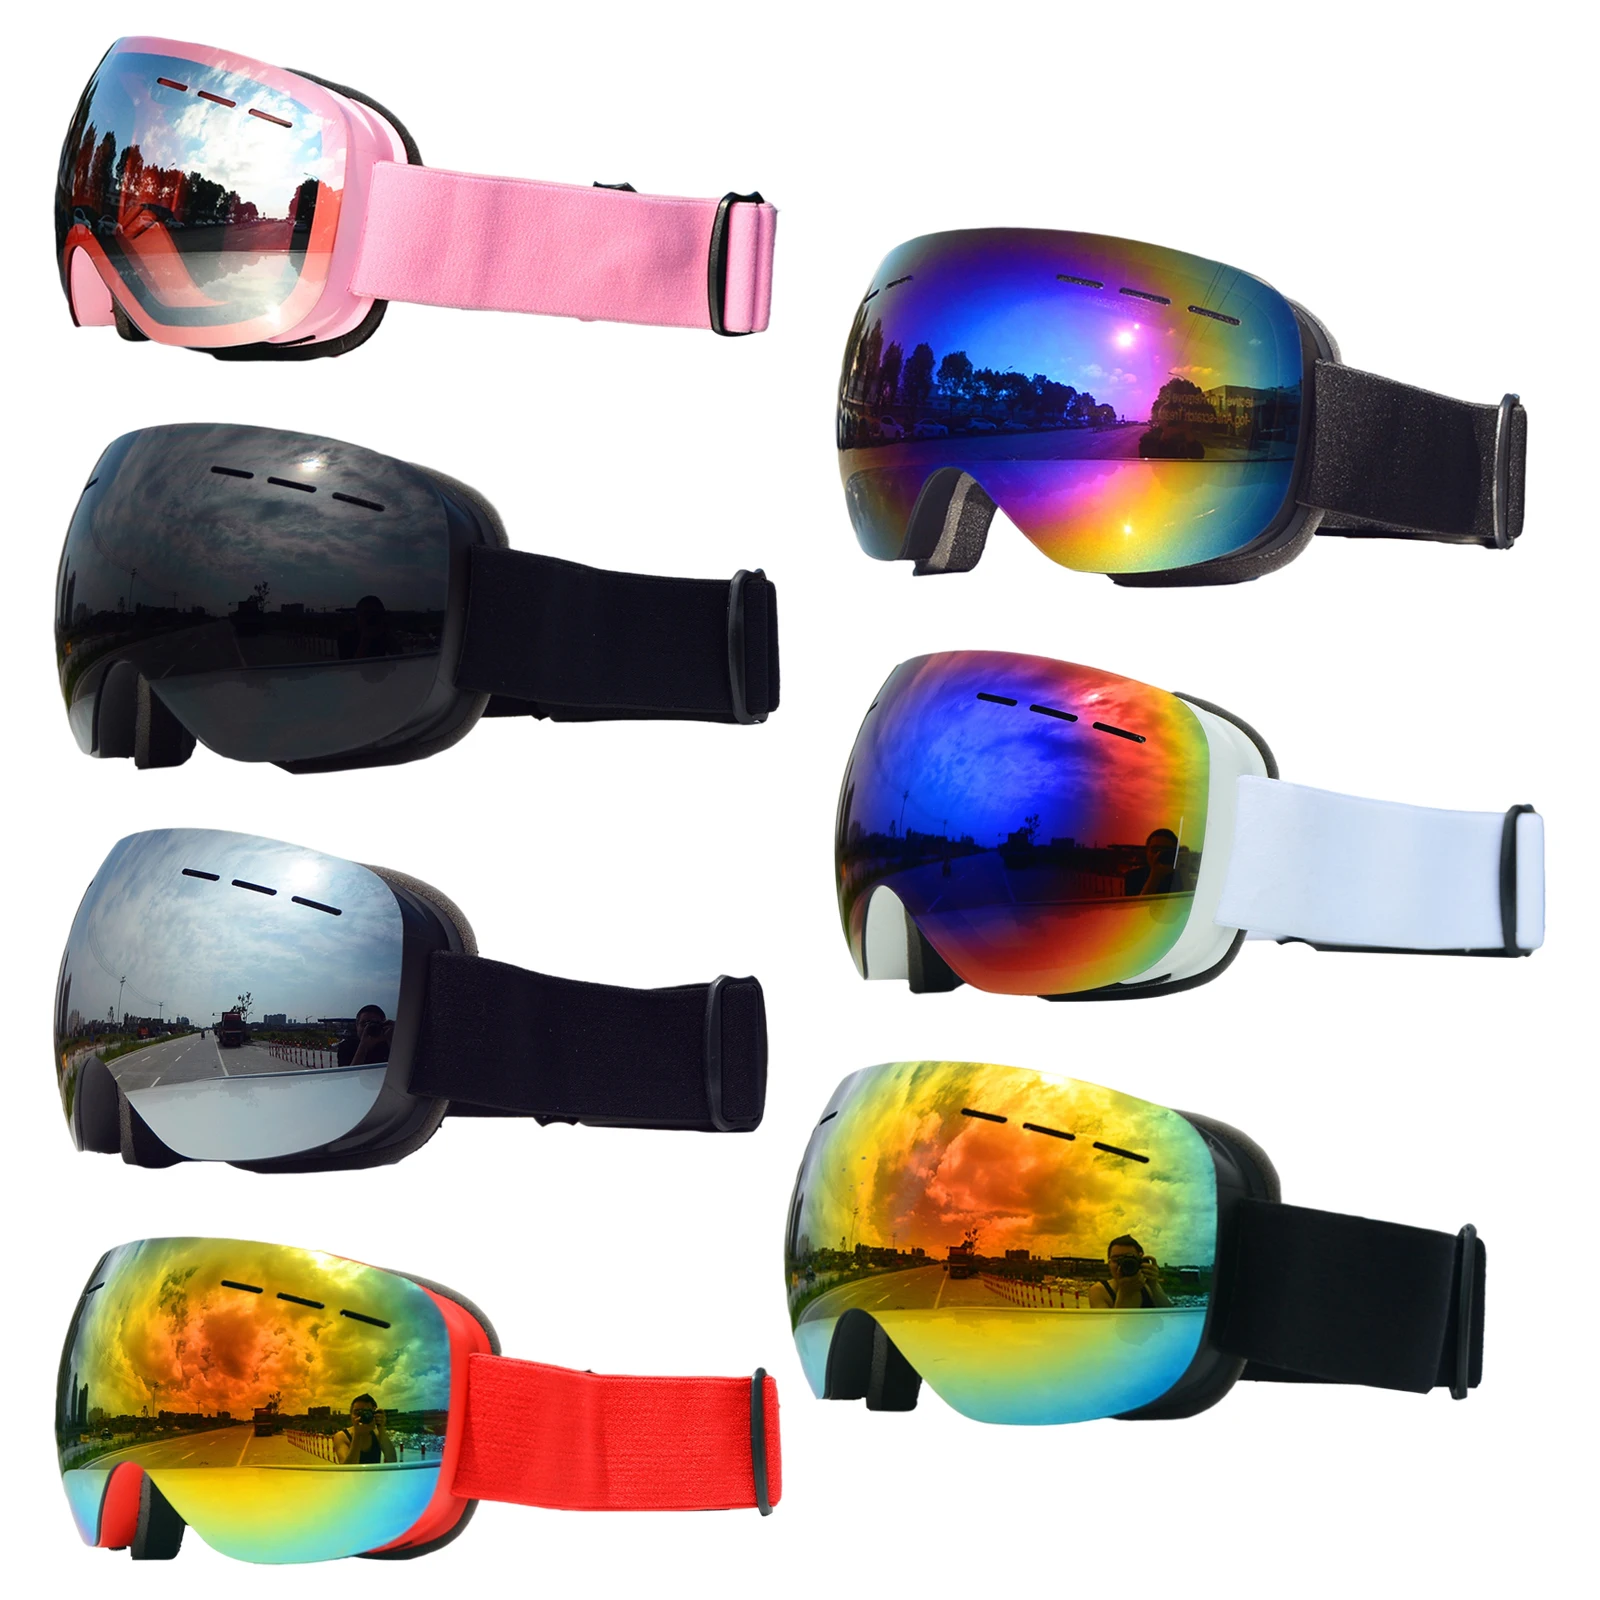 Ski Goggles Scratchproof Premium Snow Windproof Dustproof Glasses for Snowmobil Skiing Motorcycle Grunge Bike Motocross Youth